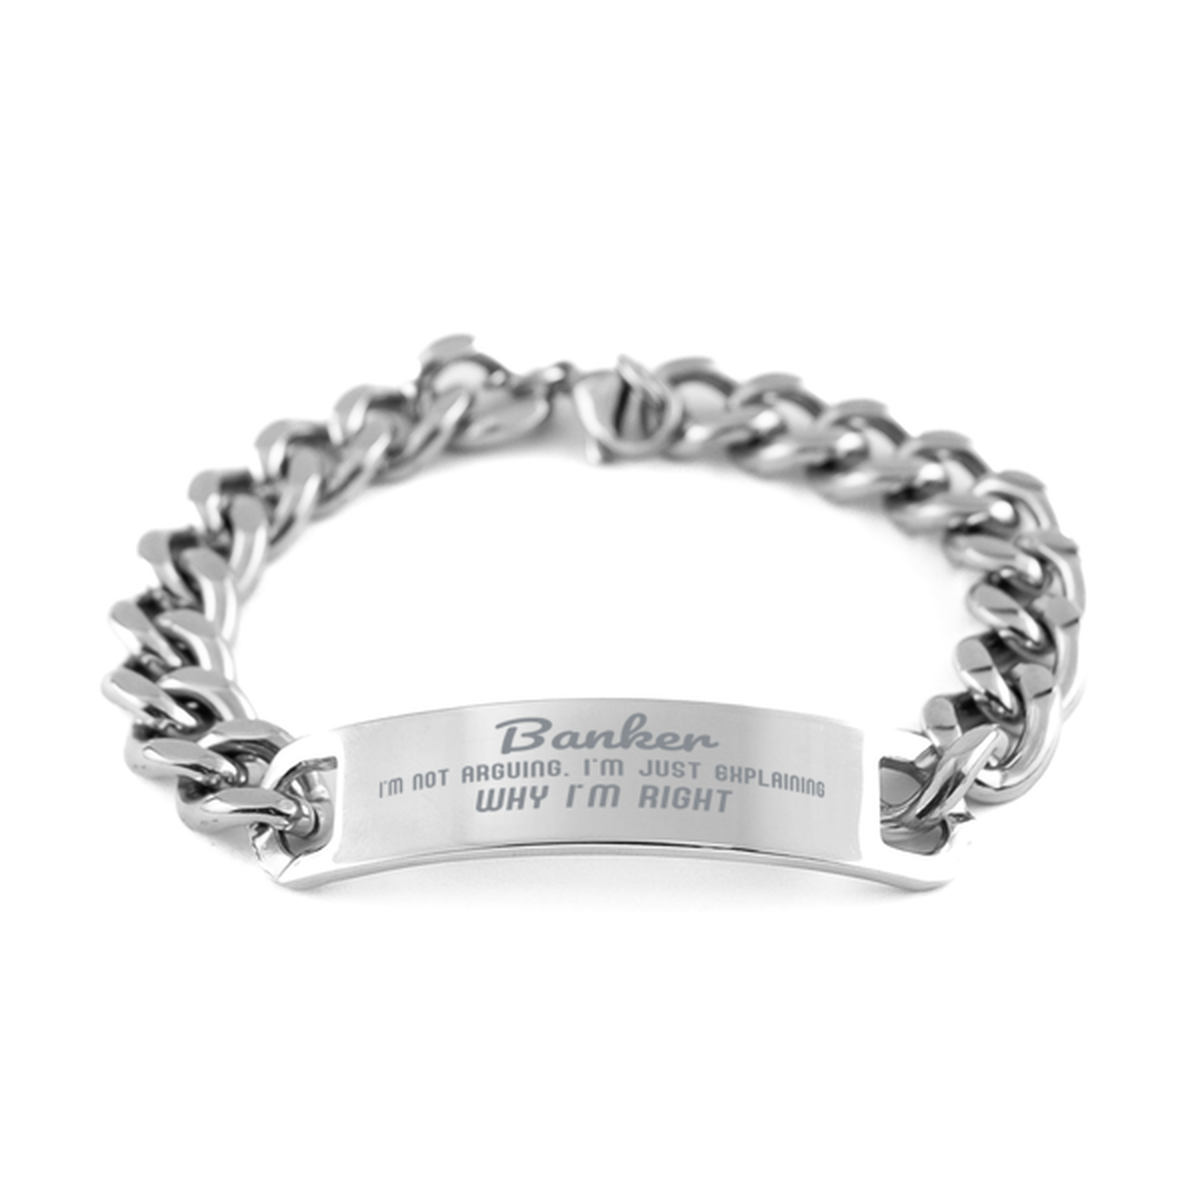 Banker I'm not Arguing. I'm Just Explaining Why I'm RIGHT Cuban Chain Stainless Steel Bracelet, Graduation Birthday Christmas Banker Gifts For Banker Funny Saying Quote Present for Men Women Coworker